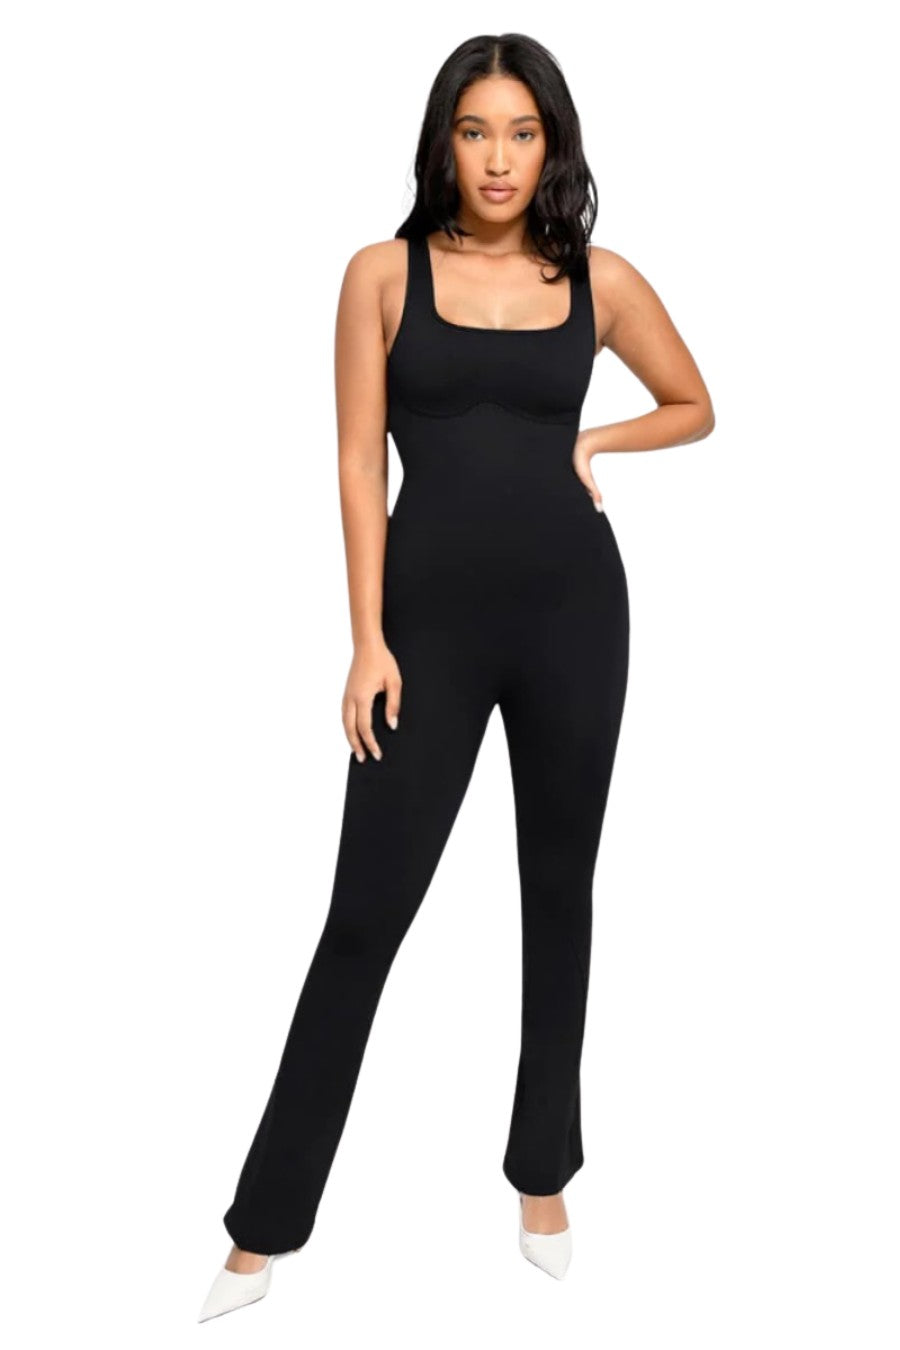 SAMPLE - Flared Jumpsuit XS/S Contour Clothing